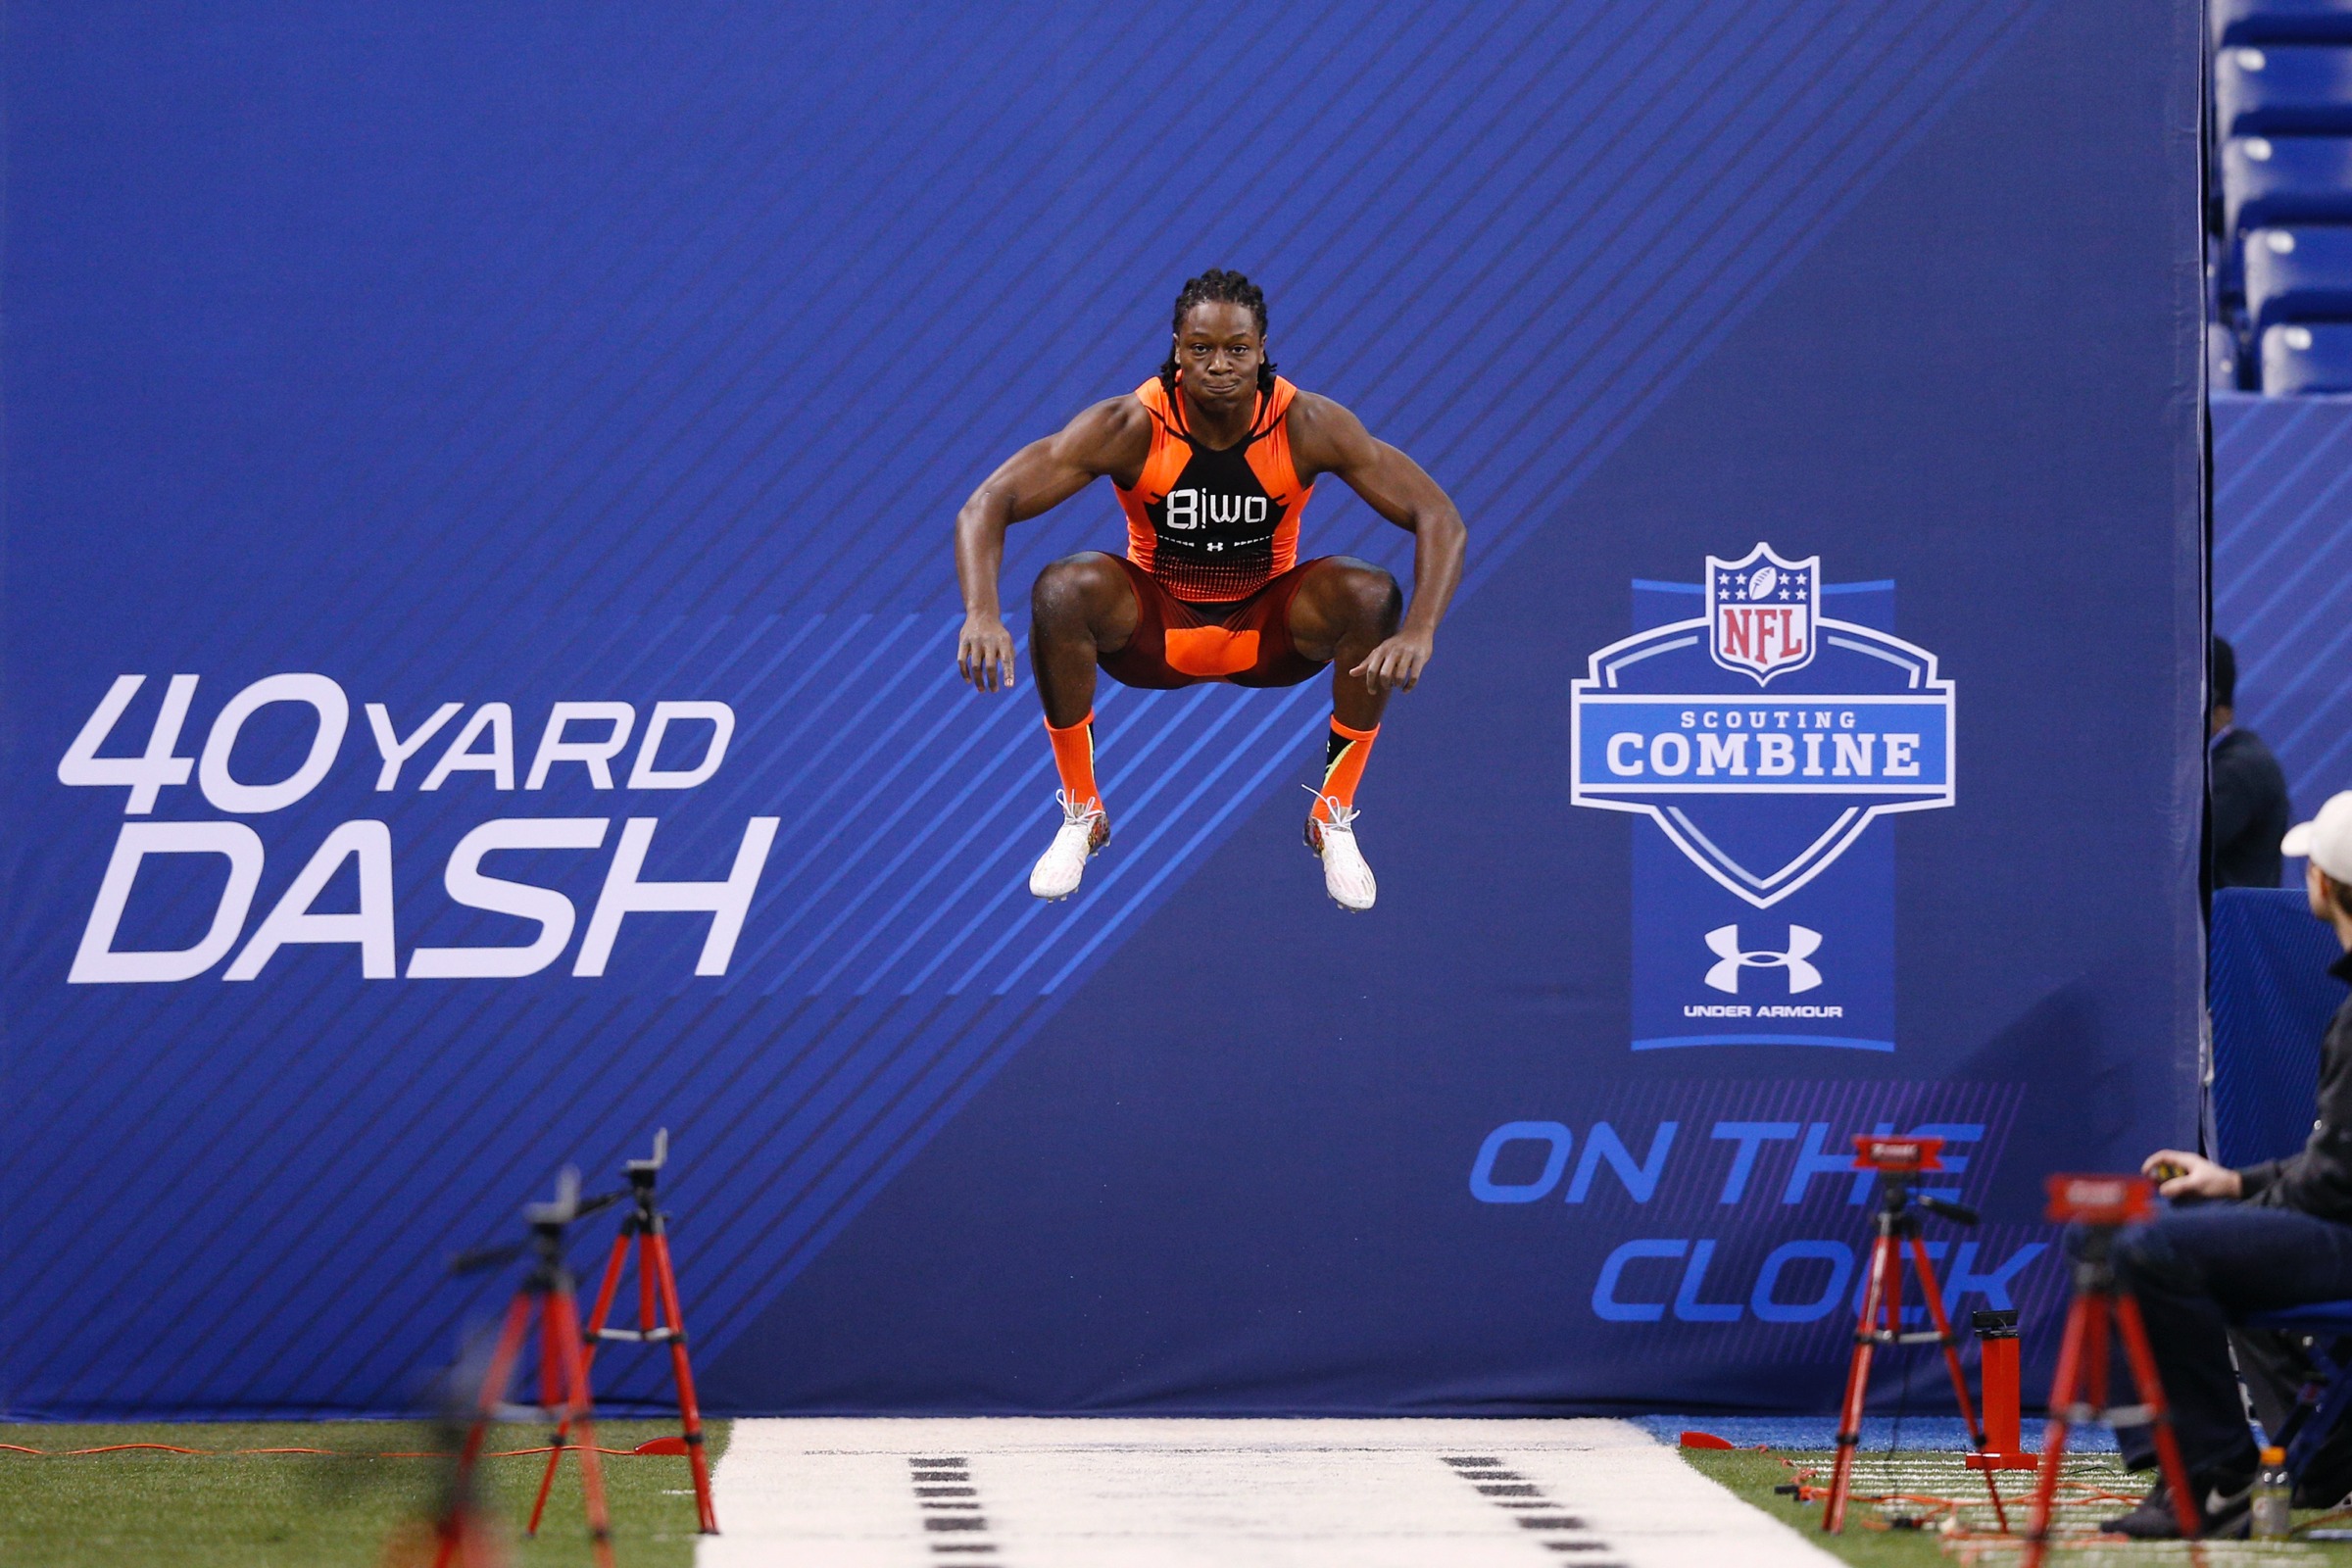 When It Comes To Measuring A Lot of Insignificant Things, Nothing Beats the NFL Combine